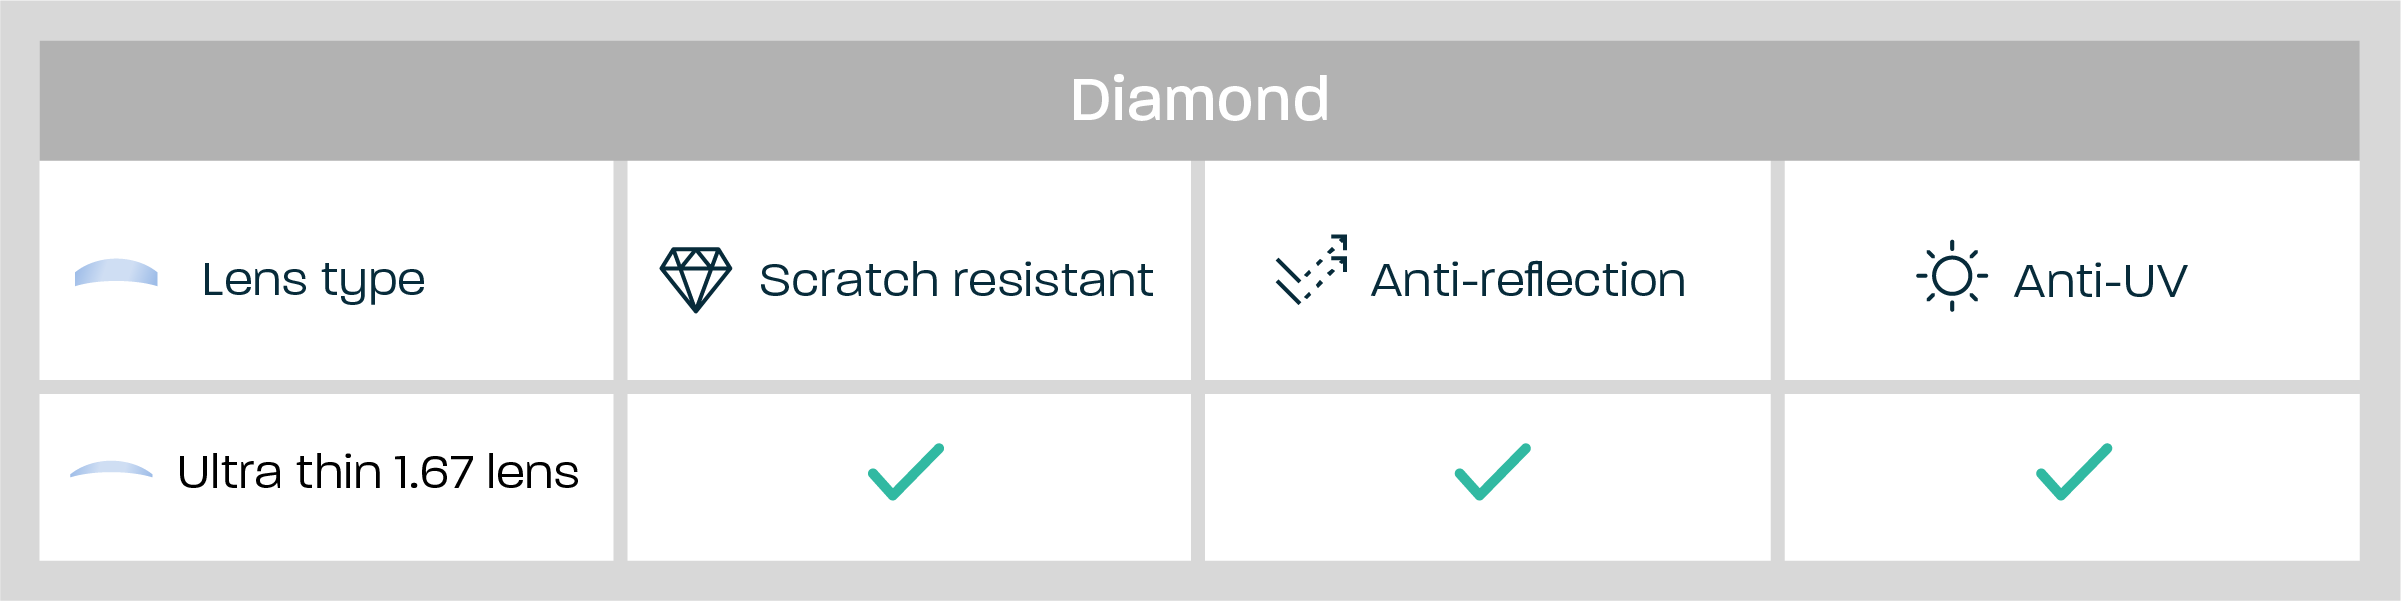 Diamond Package features: ultra thin lenses, scratch resistant, anti-reflection and anti-UV coatings